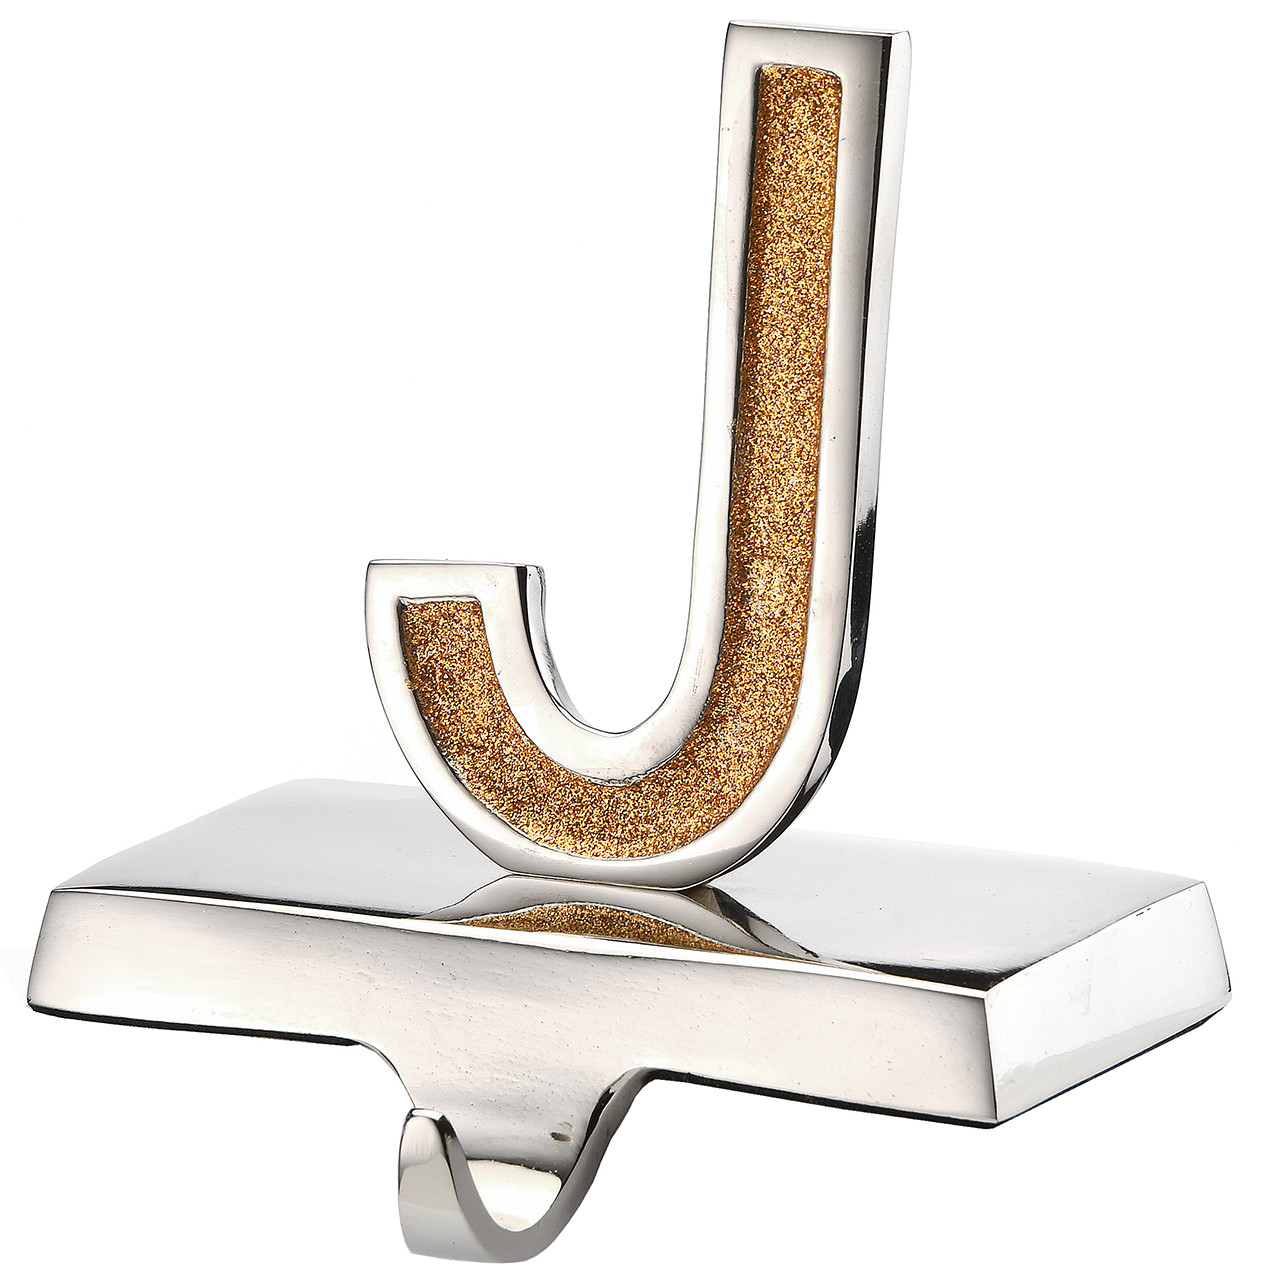 National Tree Company 5 in. Gold Sparkle JOY Stocking Holders